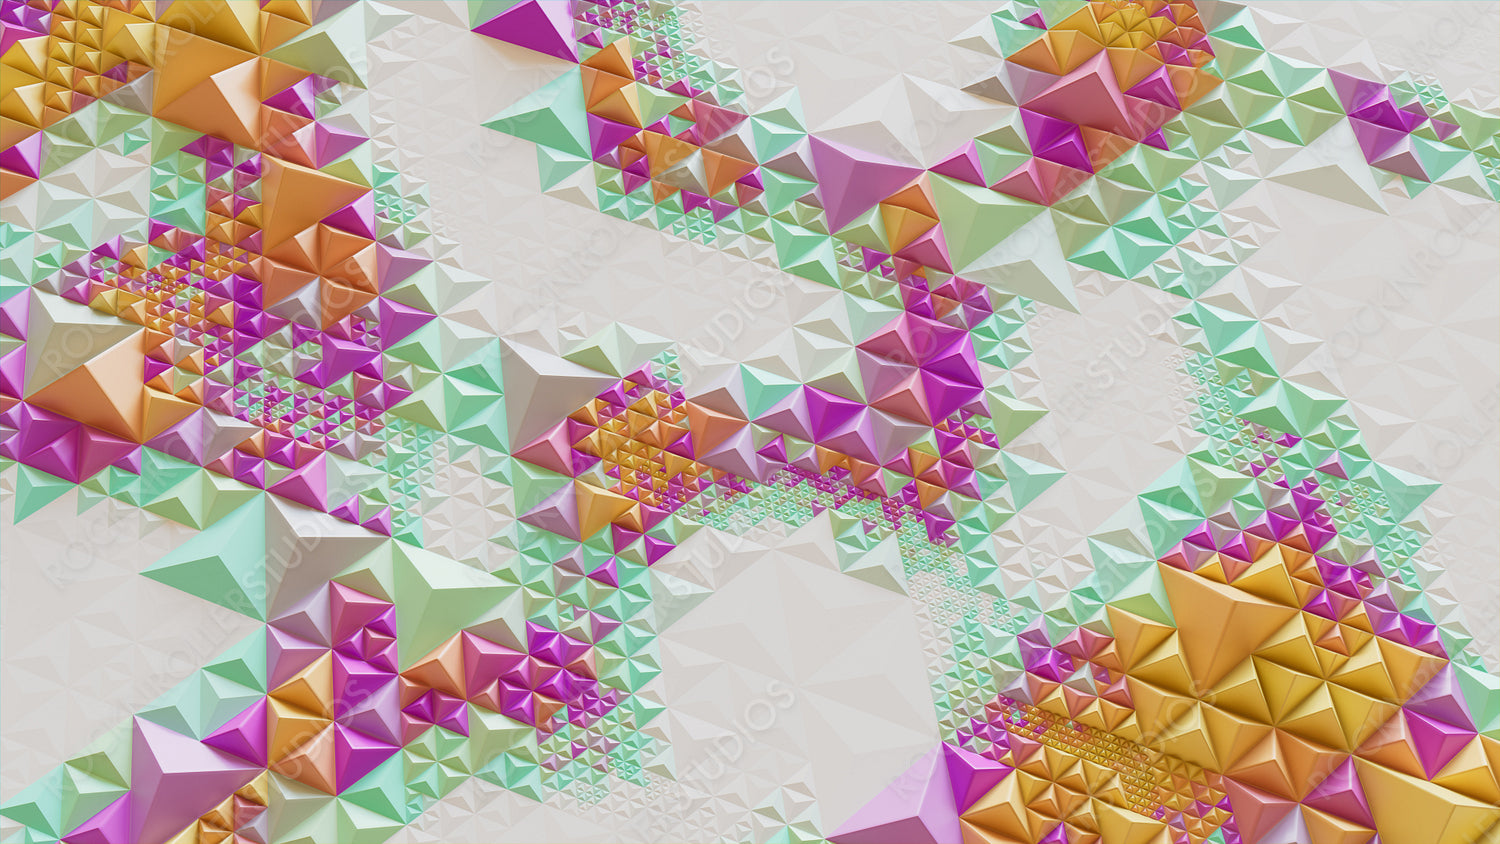 Bright High Tech Surface with Tetrahedrons. Multicolored Three-Dimensional 3d Texture.